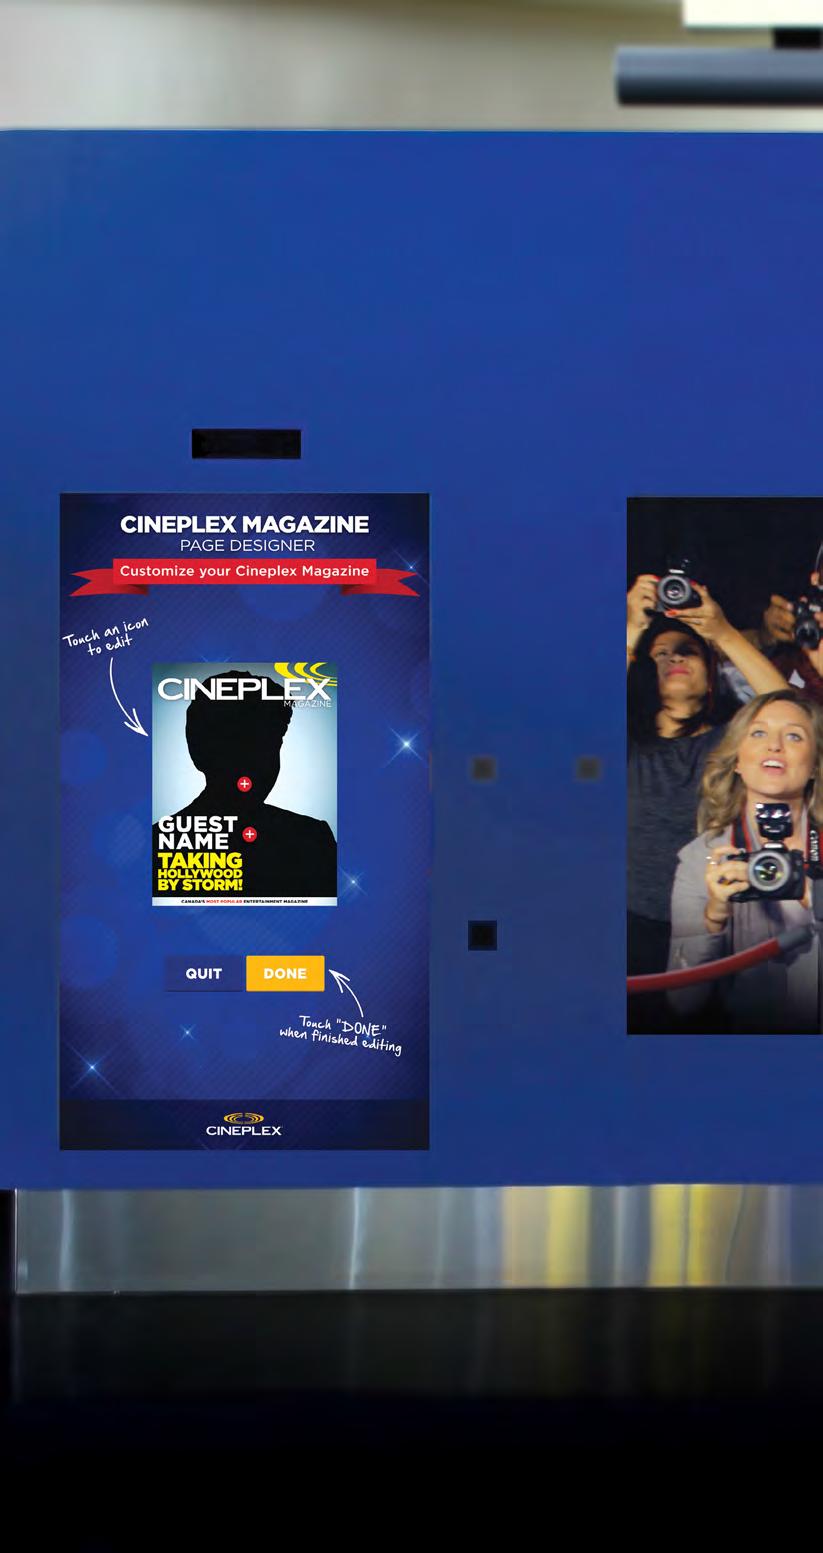 Consumer Engagement Like No Other ocated in high-traffic locations within cinema lobbies, this Can t Miss experiential zone provides clients with the latest interactive technology to engage and